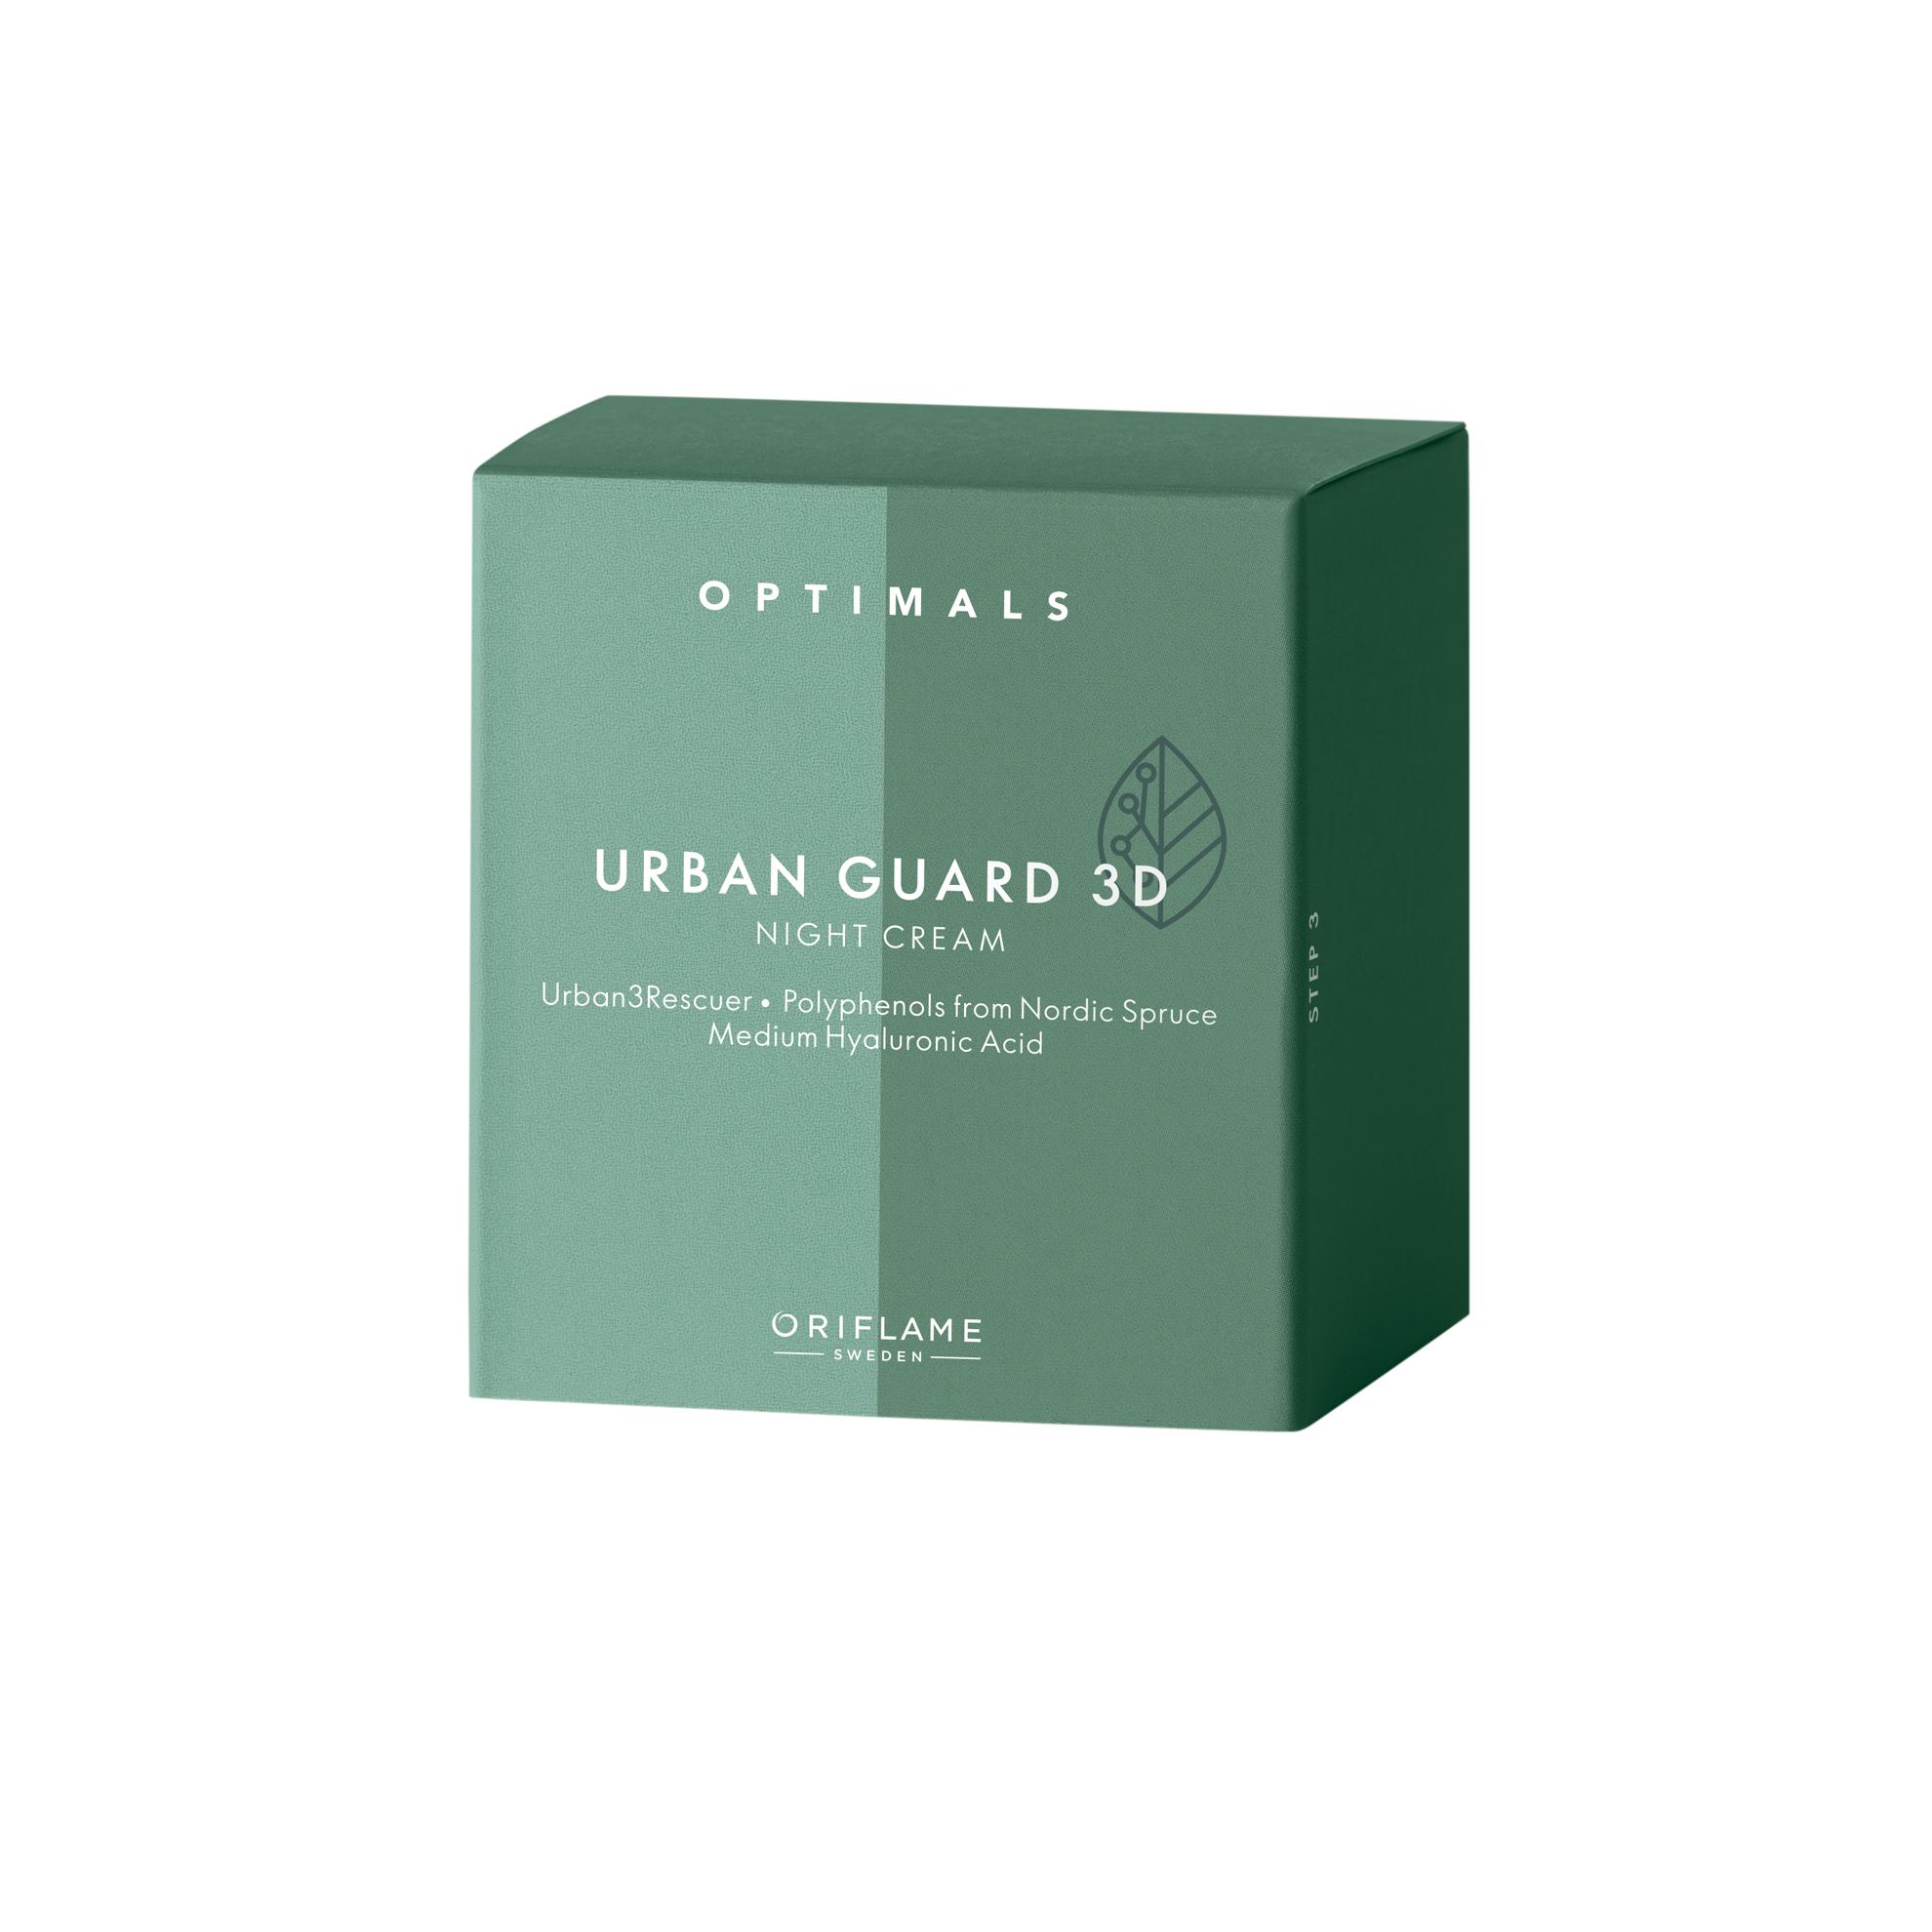 https://media-cdn.oriflame.com/productImage?externalMediaId=product-management-media%2fProducts%2f44260%2fAZ%2f44260_1.png&id=15186919&version=1